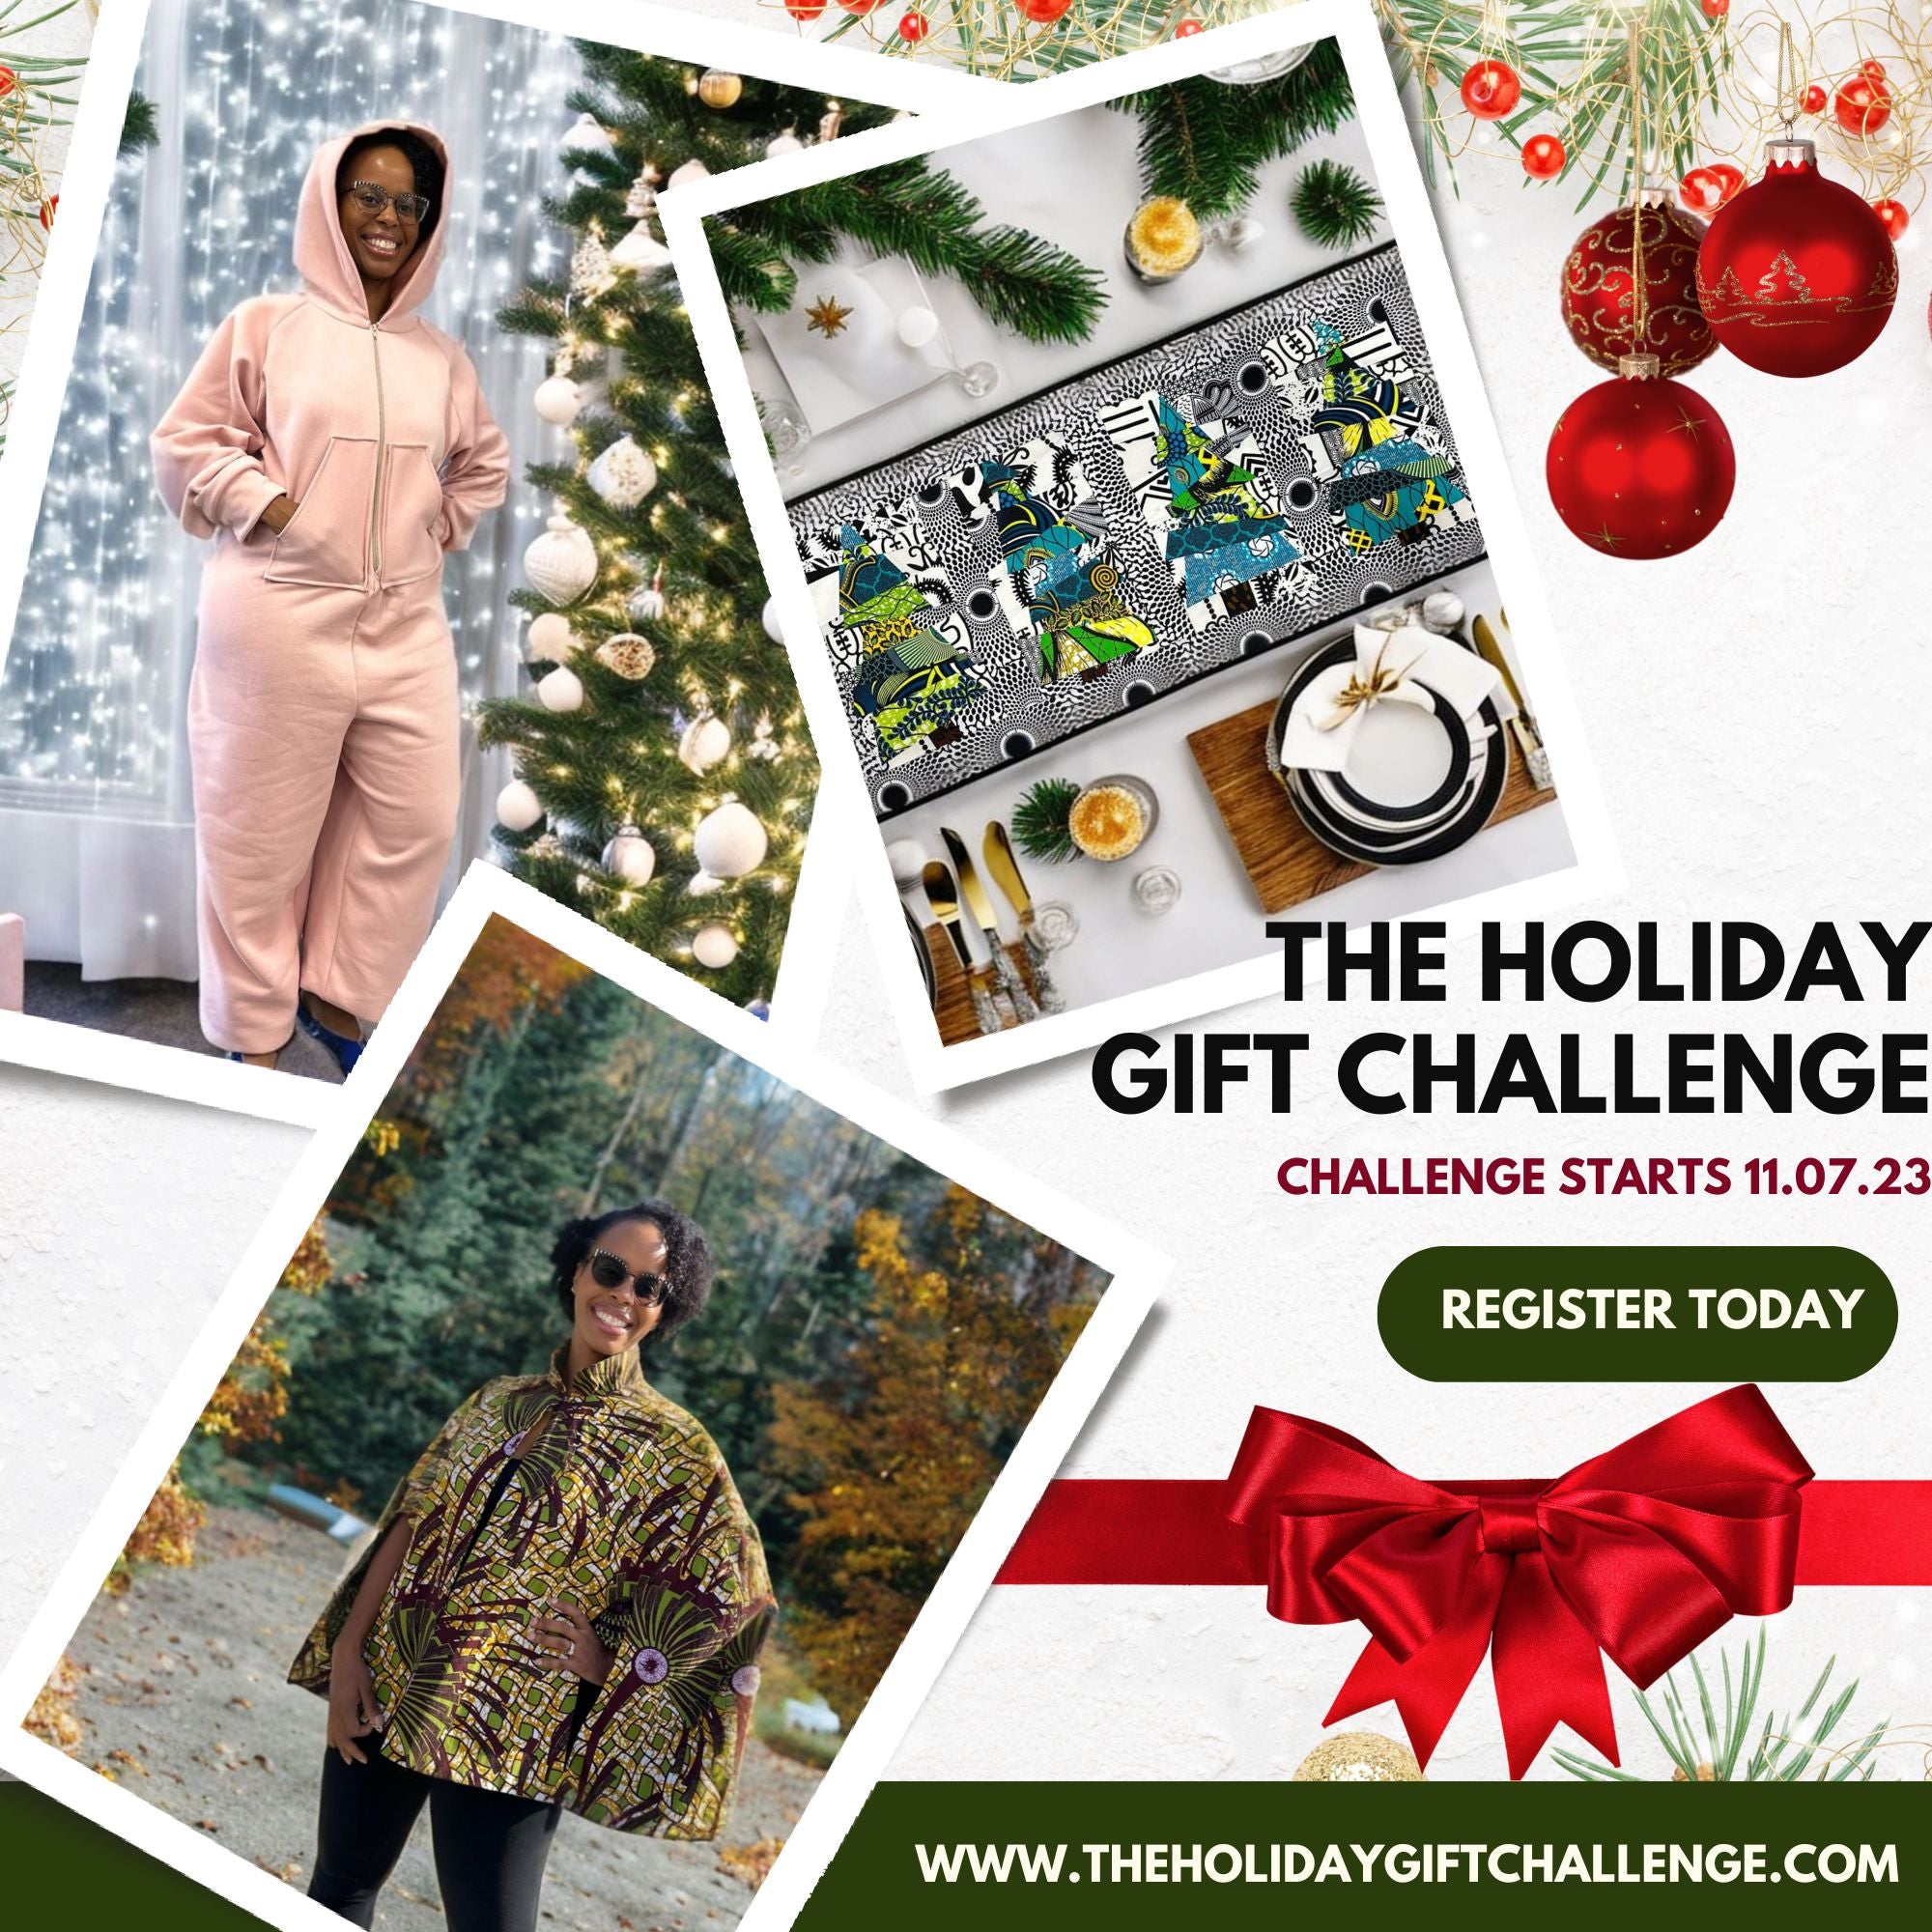 The Holiday Gift Challenge